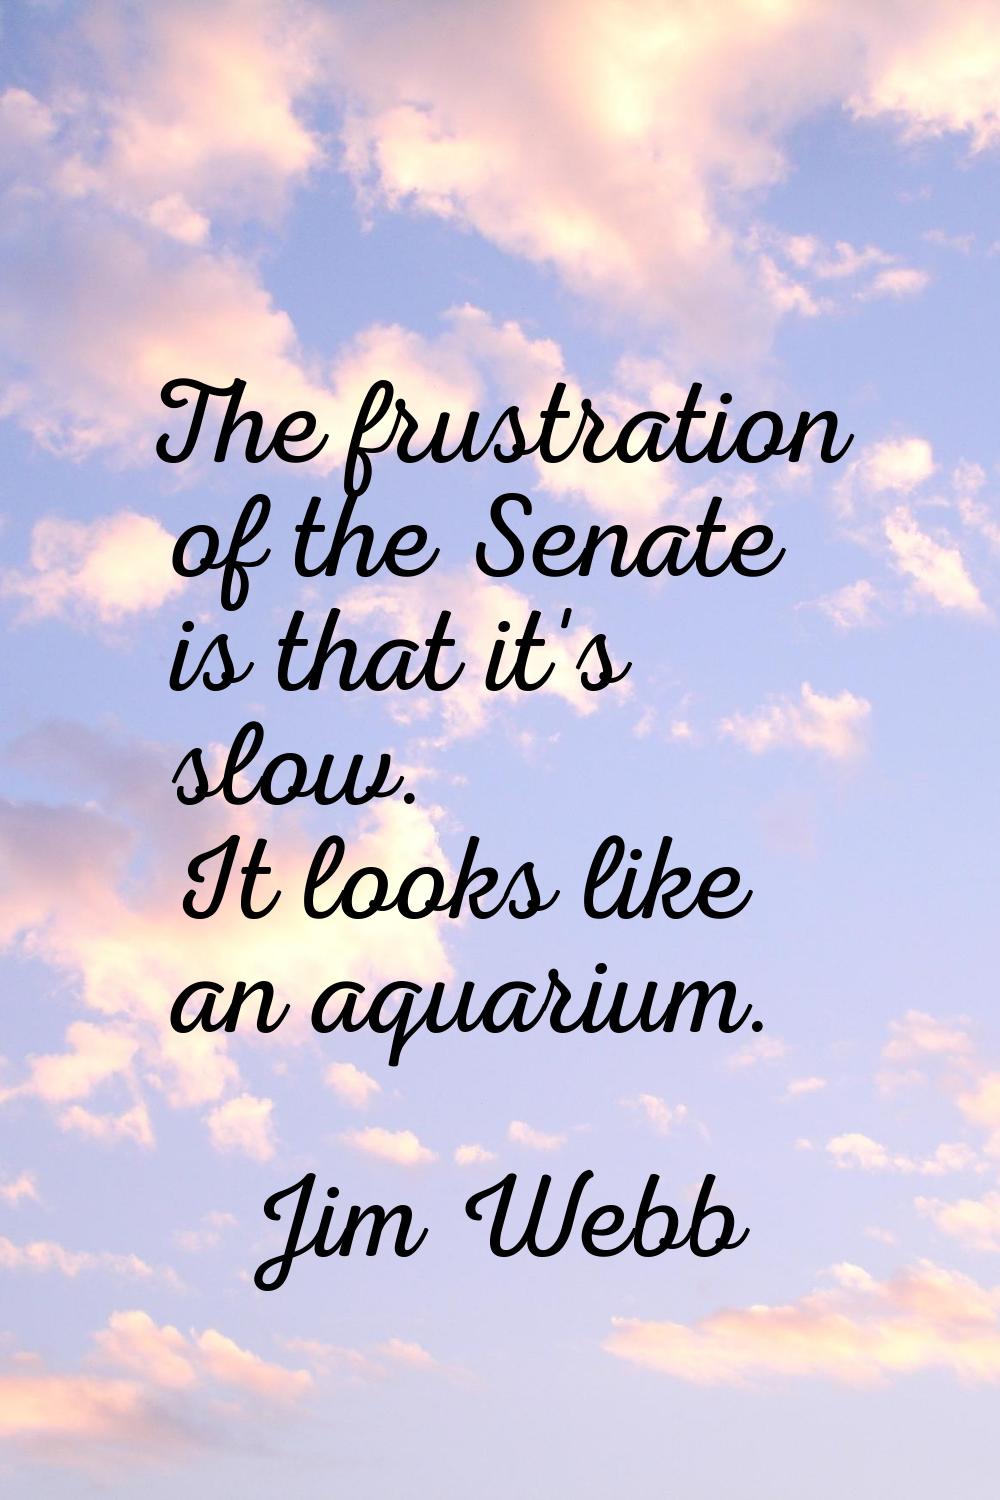 The frustration of the Senate is that it's slow. It looks like an aquarium.